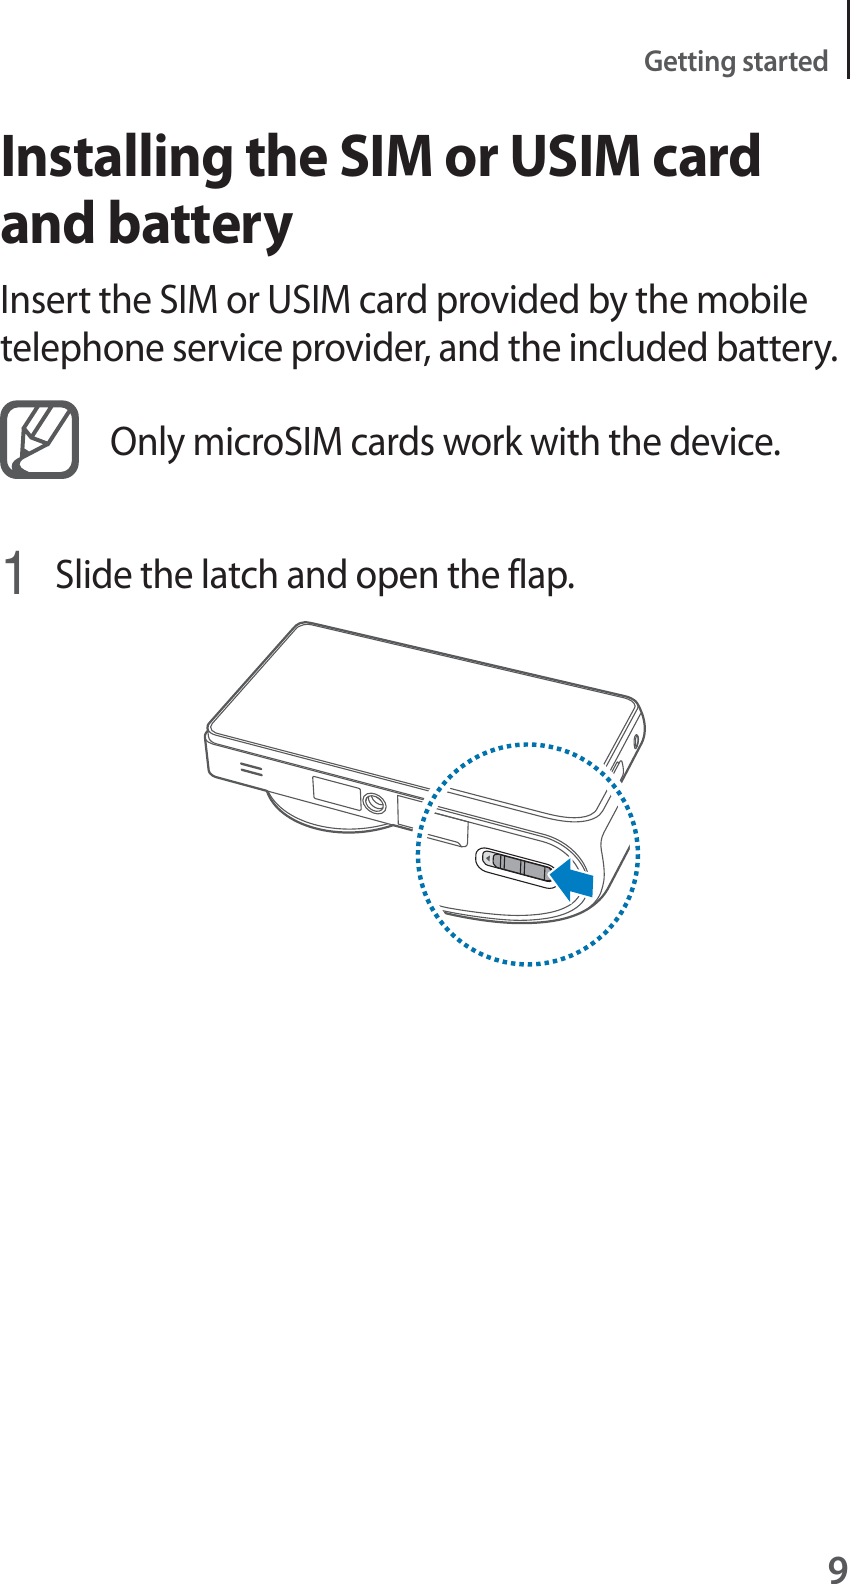 9Getting startedInstalling the SIM or USIM card and batteryInsert the SIM or USIM card provided by the mobile telephone service provider, and the included battery.Only microSIM cards work with the device.1Slide the latch and open the flap.